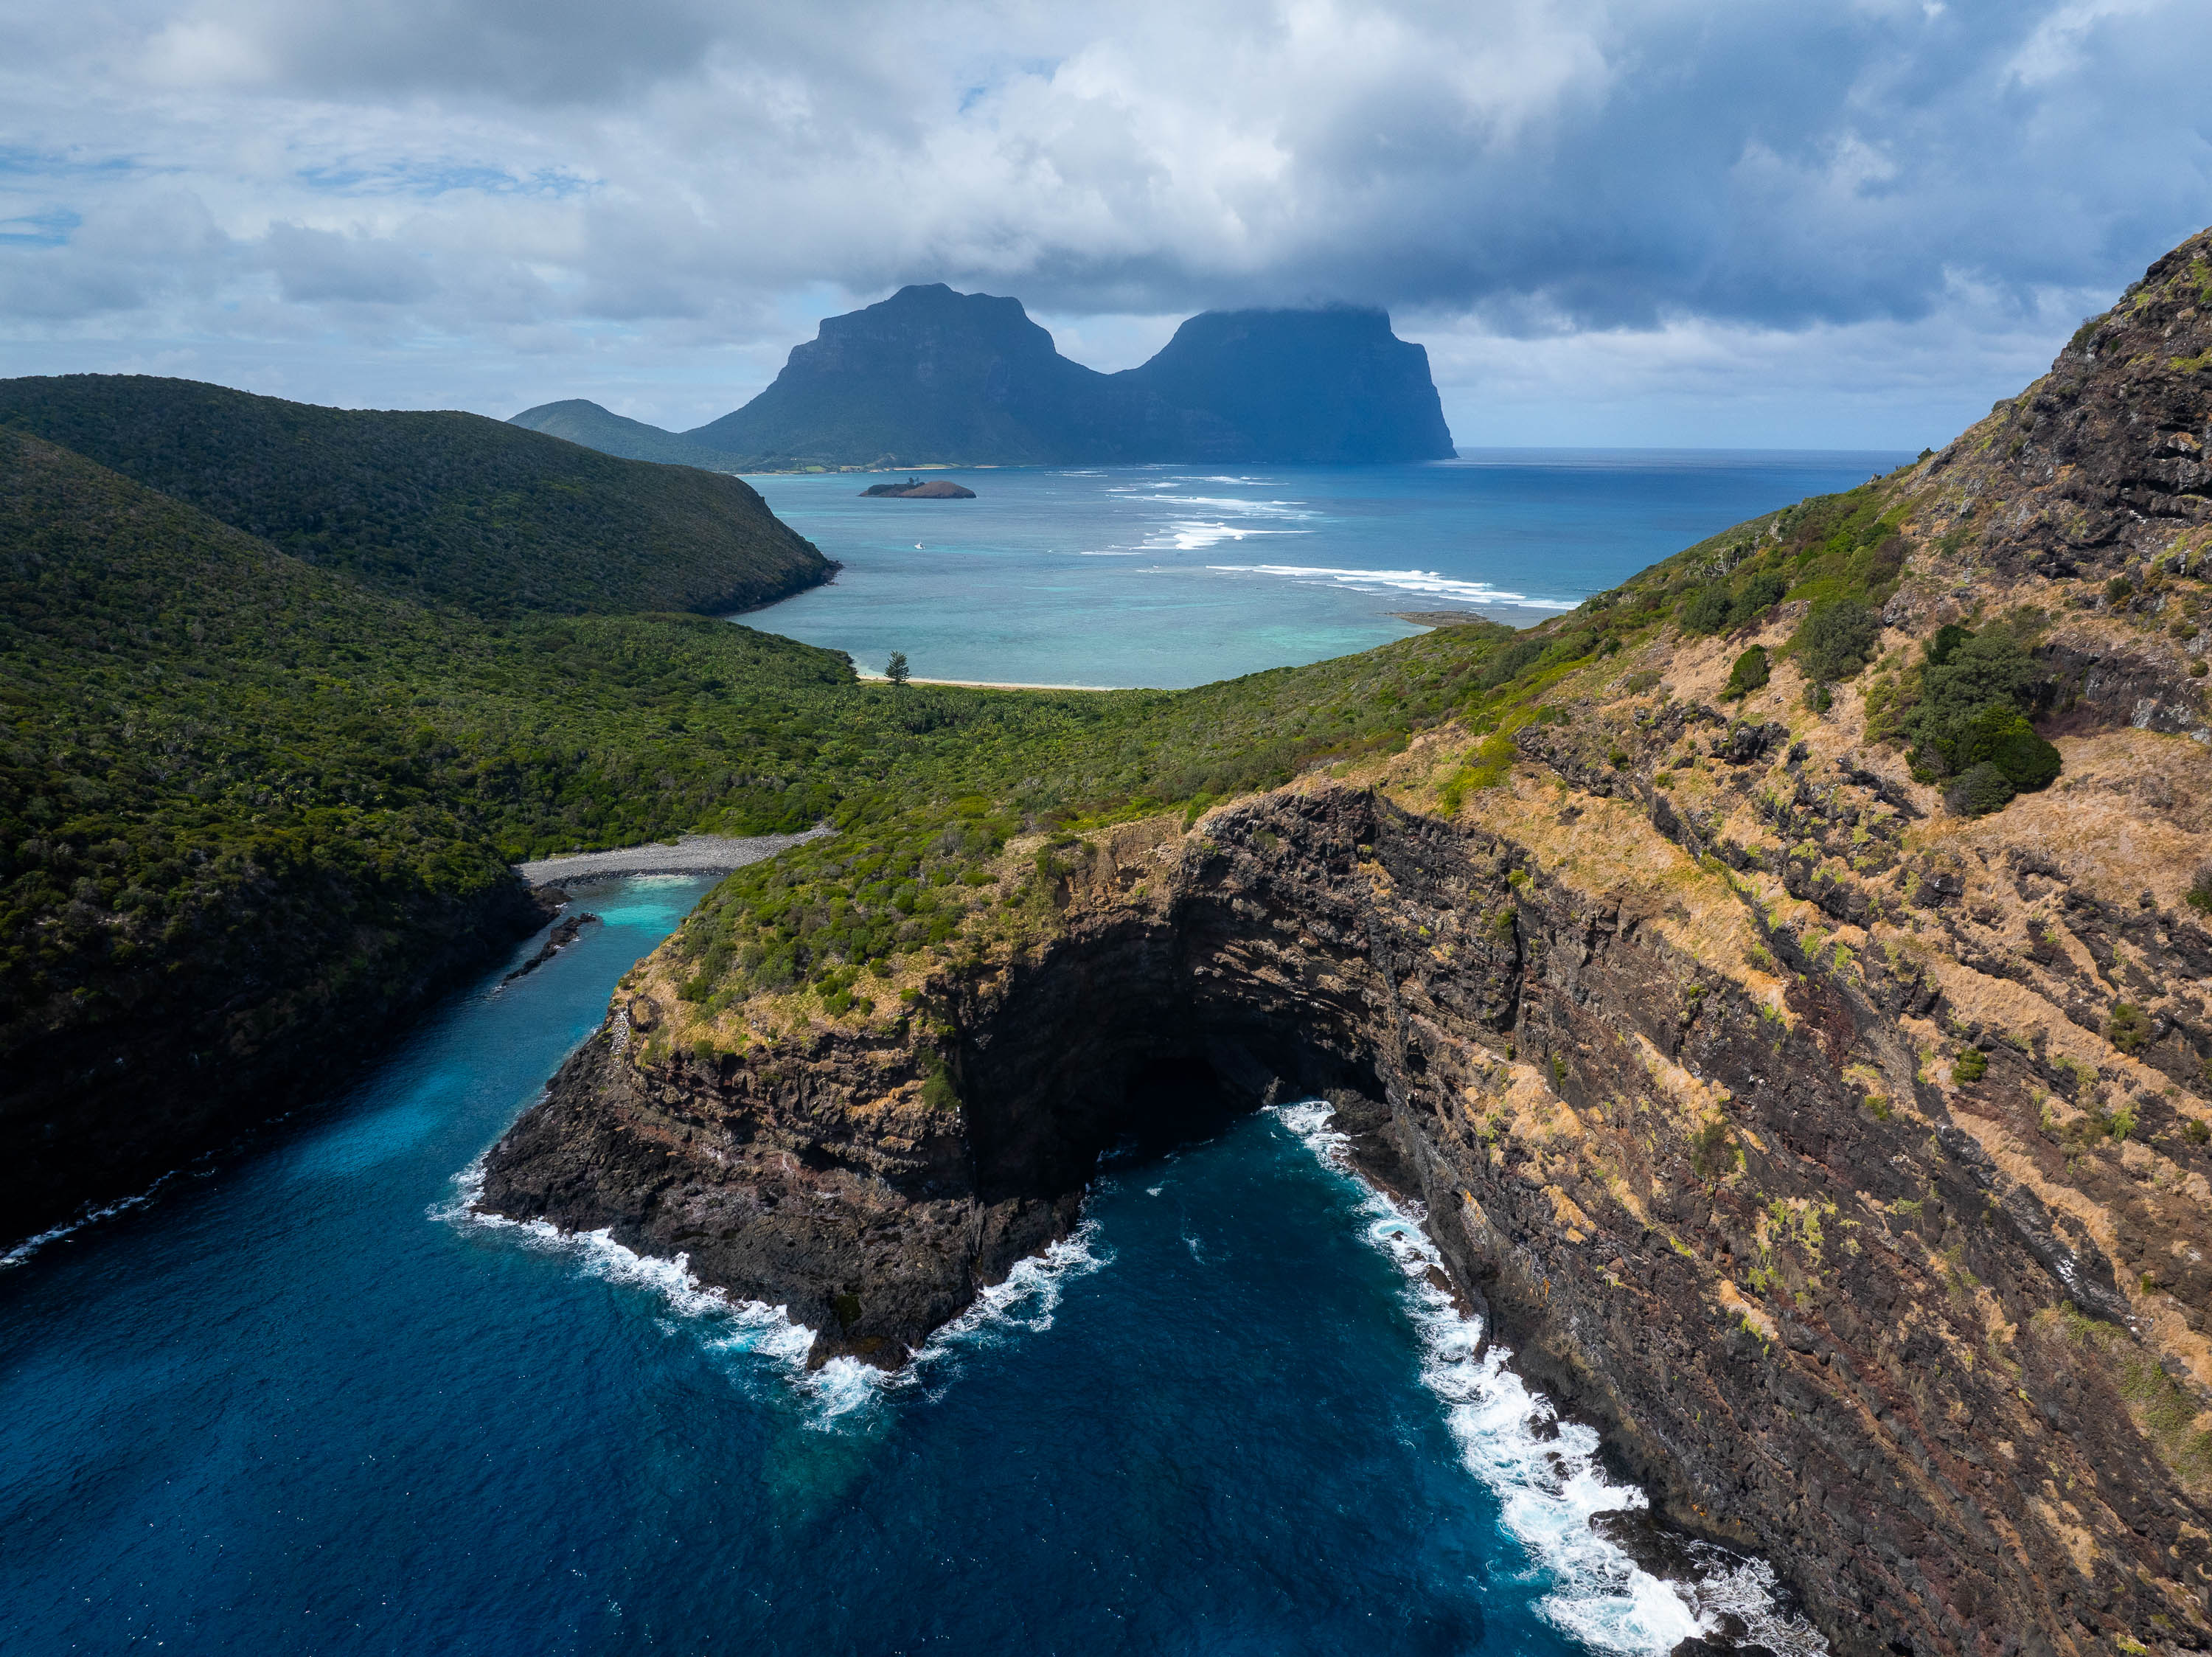 The Old Gulch, Lord Howe Island